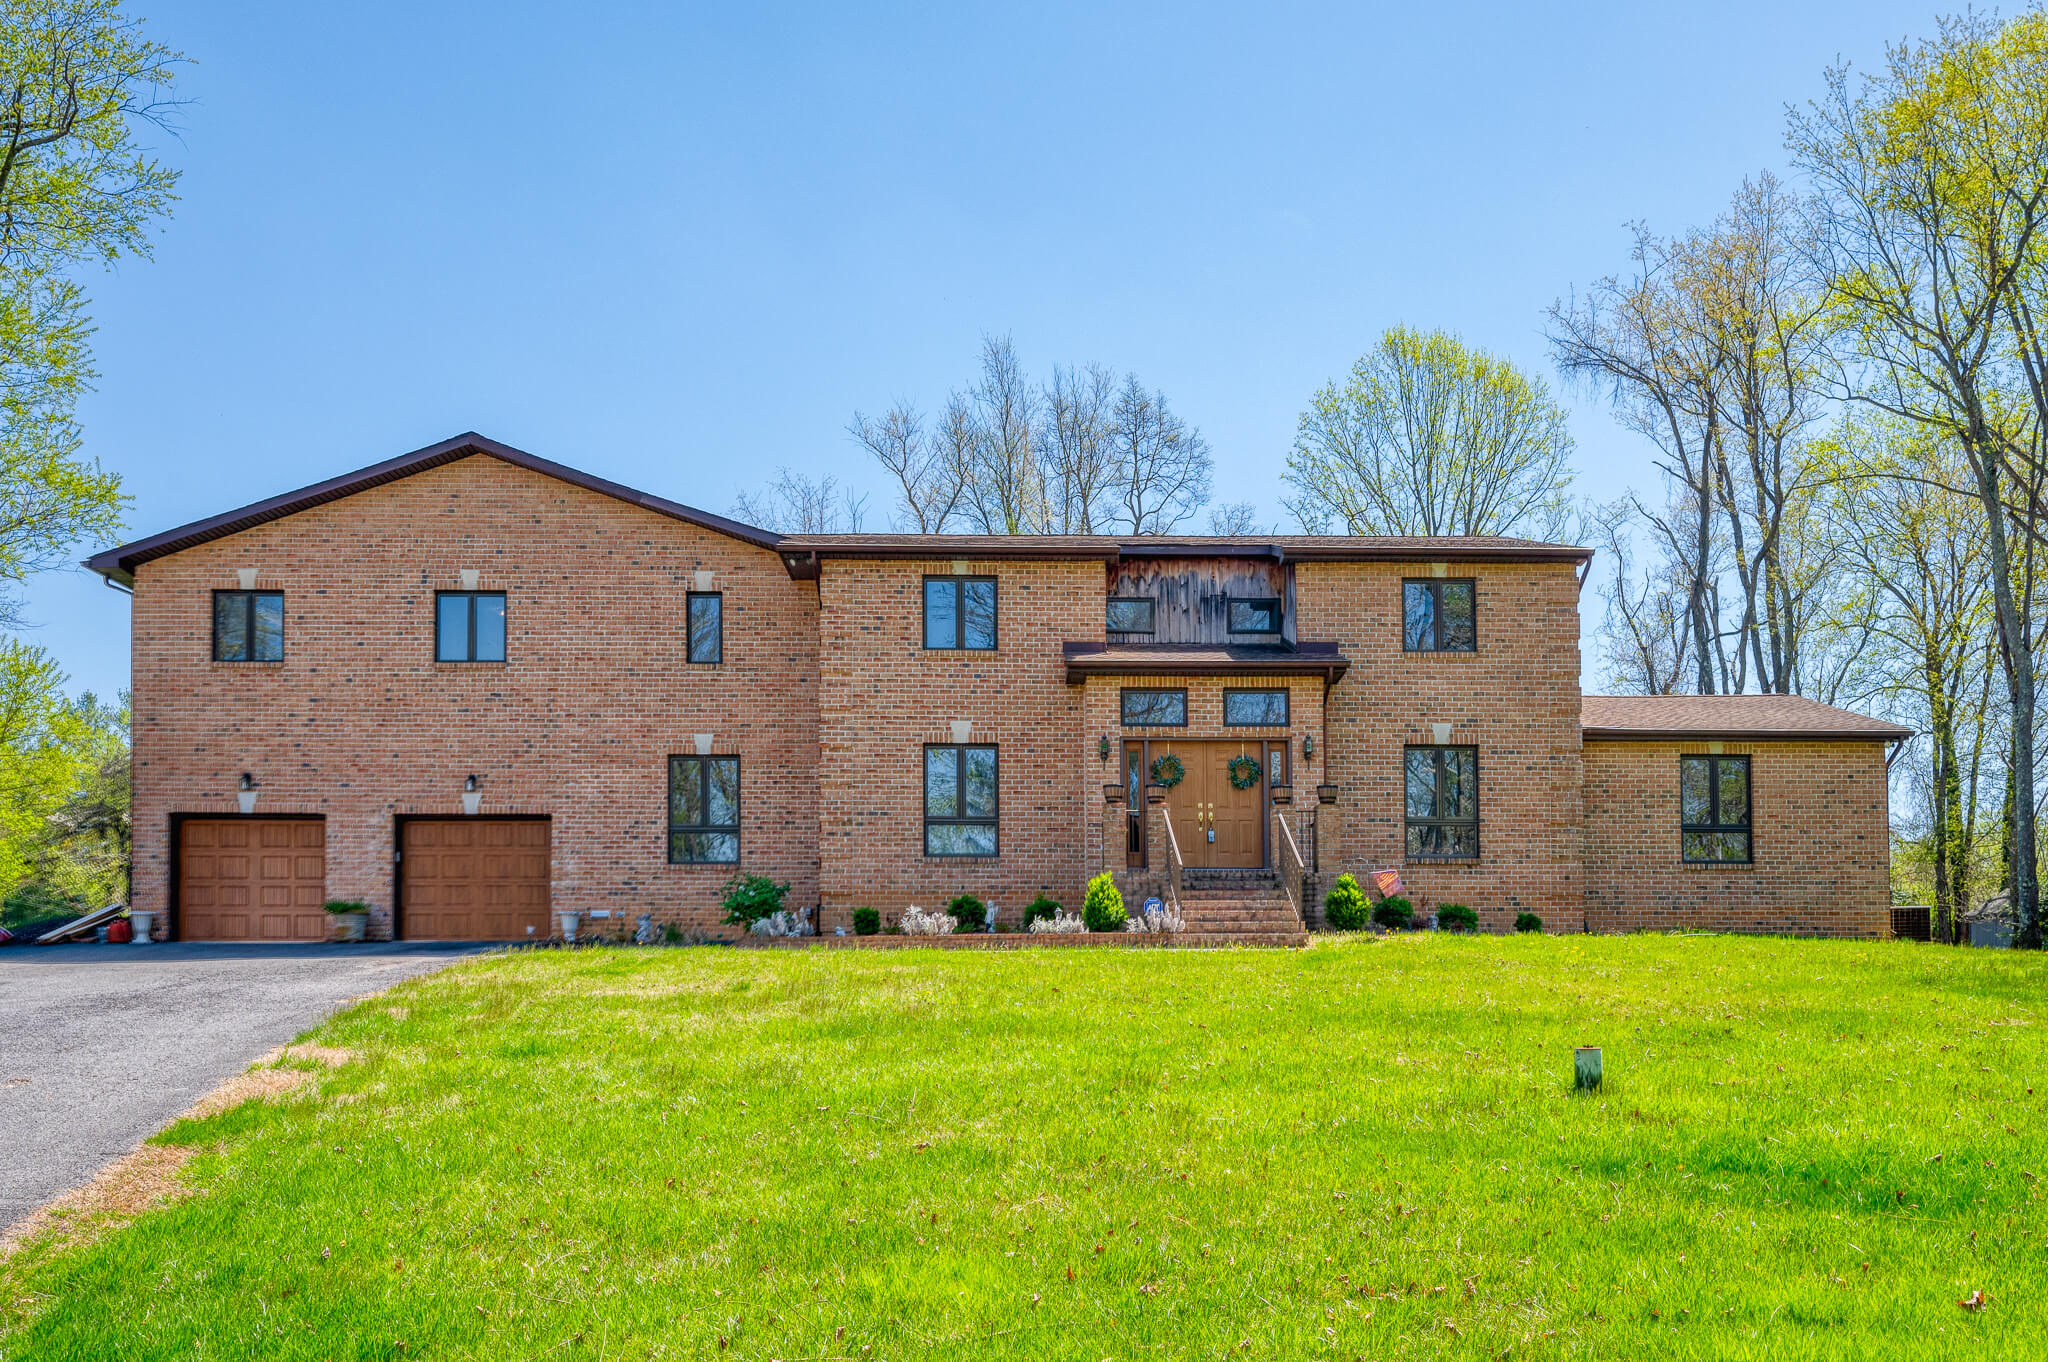 14611 Woodbark Lane | Home for sale in Baltimore County, MD